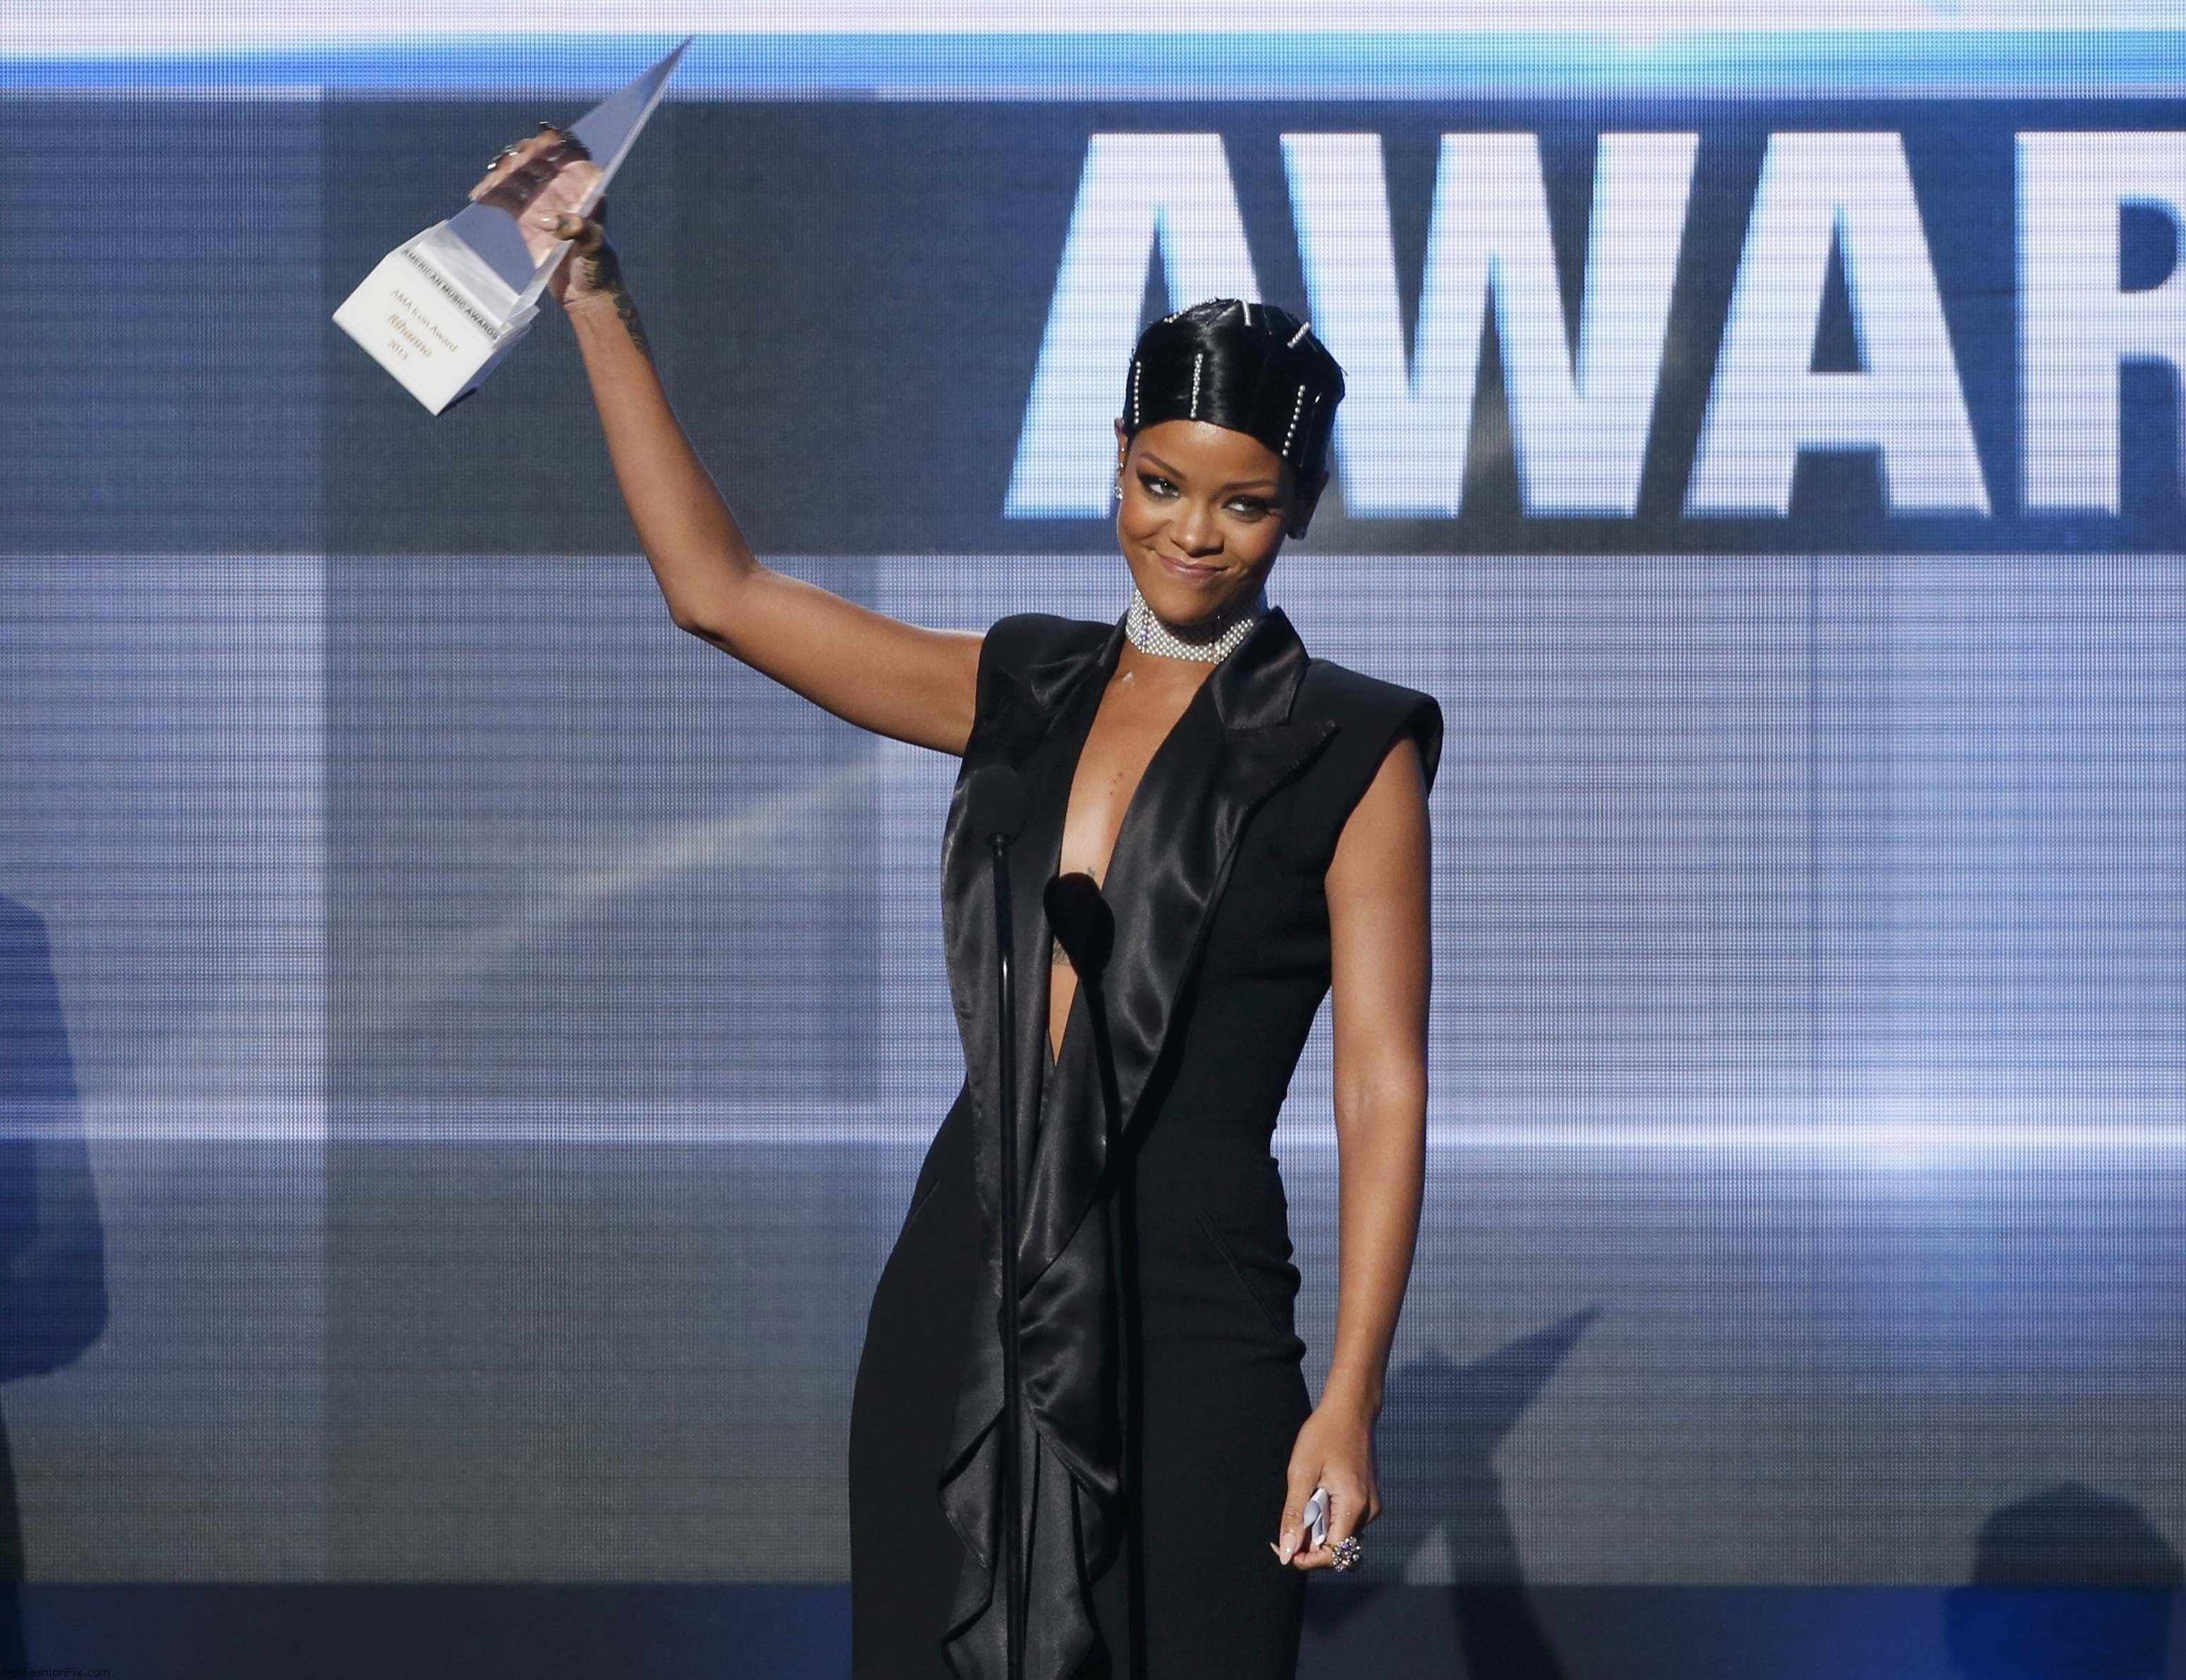 Rihanna_accepts_the_Icon_Award_from_her_mother_Monica_Fenty_at_the_41st_American_Music_Awards_in_Los_Angeles_24.11.2013_06